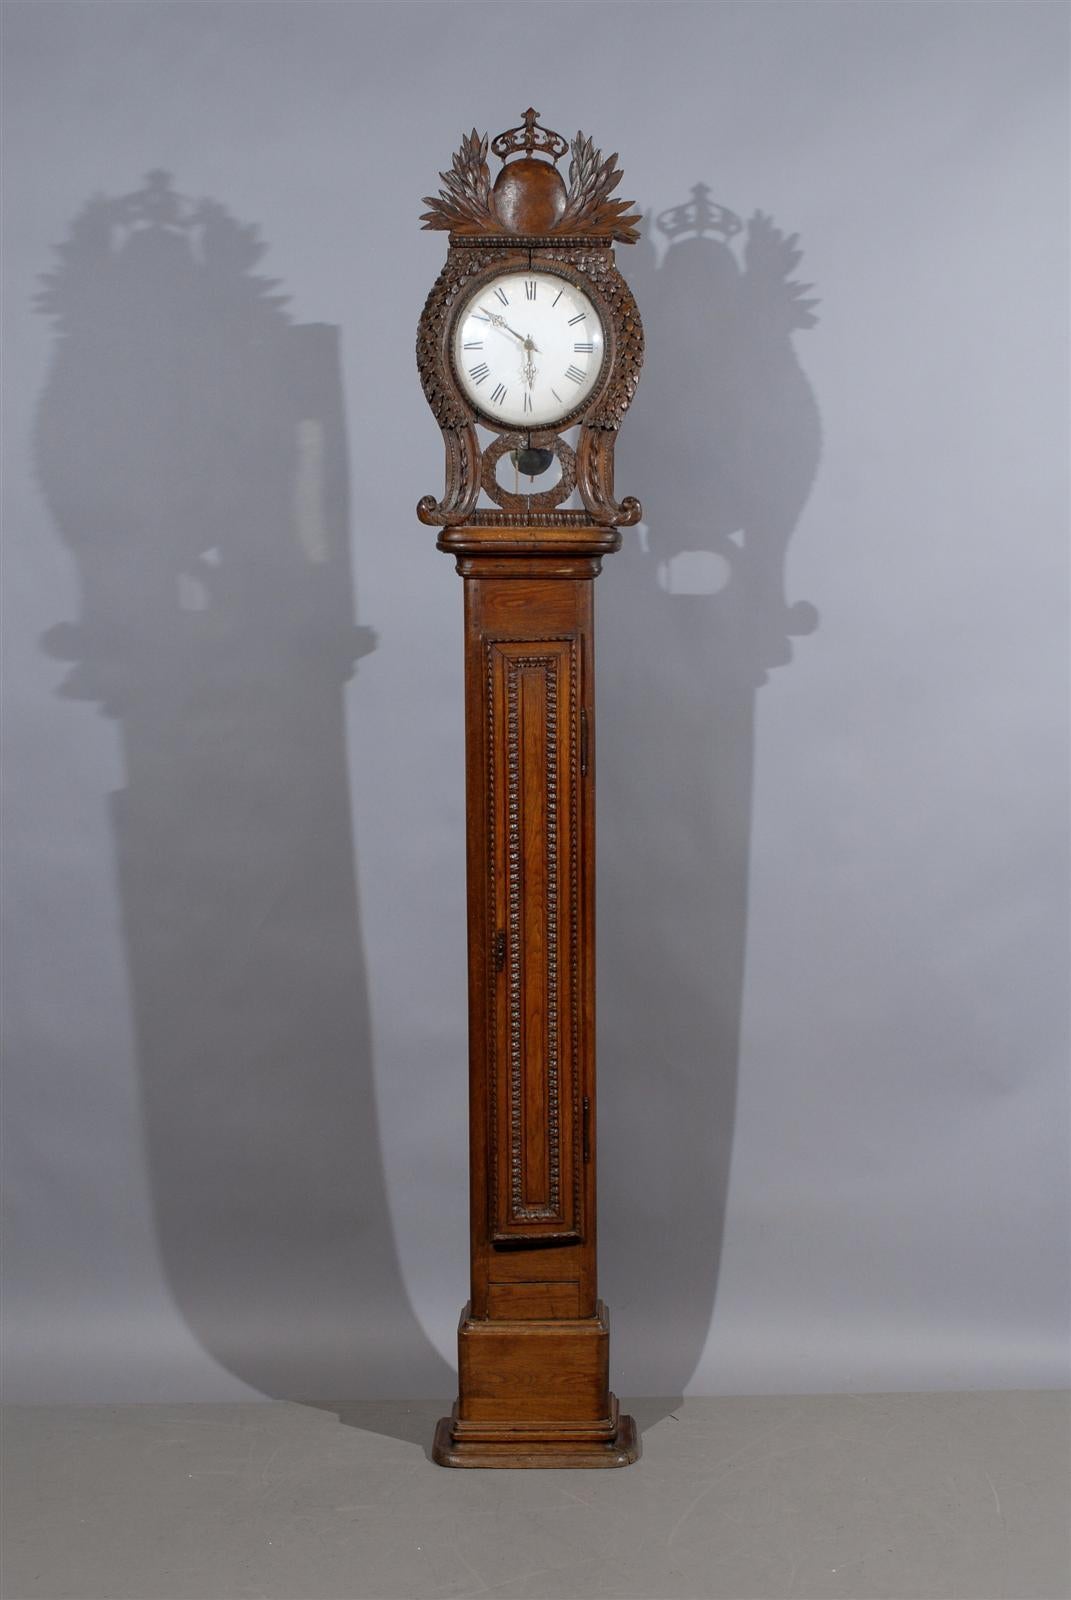 An early 19th century tall-case clock in oak with carved crest of crown and laurel leaves and round white enamel face, originating from Normandy France and dating from the turn of the 19th century. 

Clock works sold as is. Please contact us